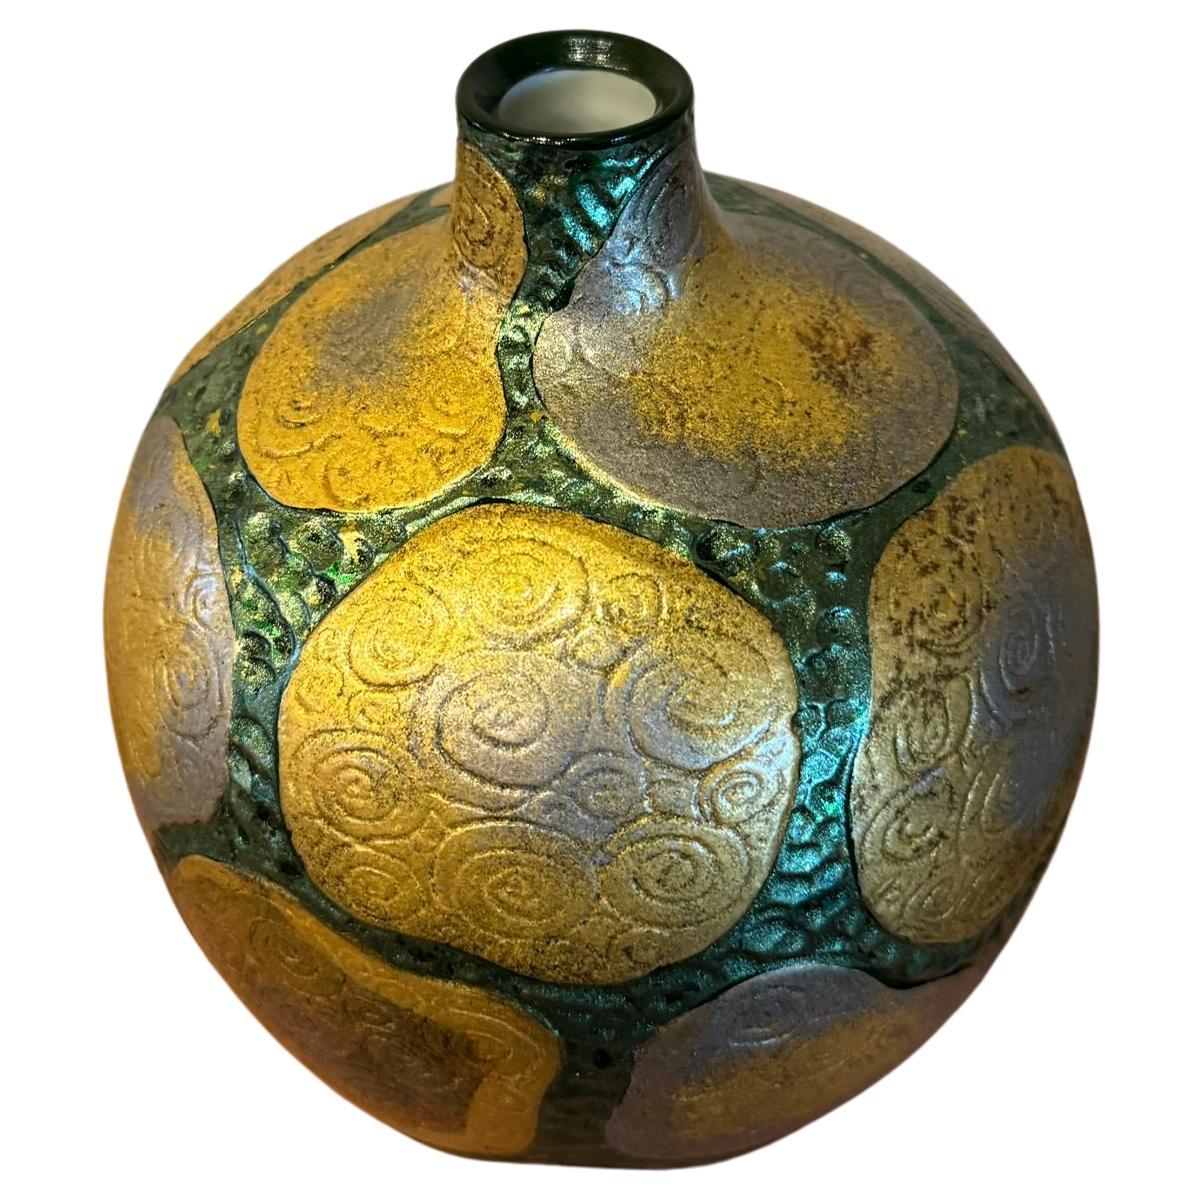 Extraordinary decorative porcelain vase with mysterious intricate etchings features platinum, gold foils plus silver foil tinted in shades of vivid green, meticulously positioned using lacquer as an adhesive and sealed to the vase in a